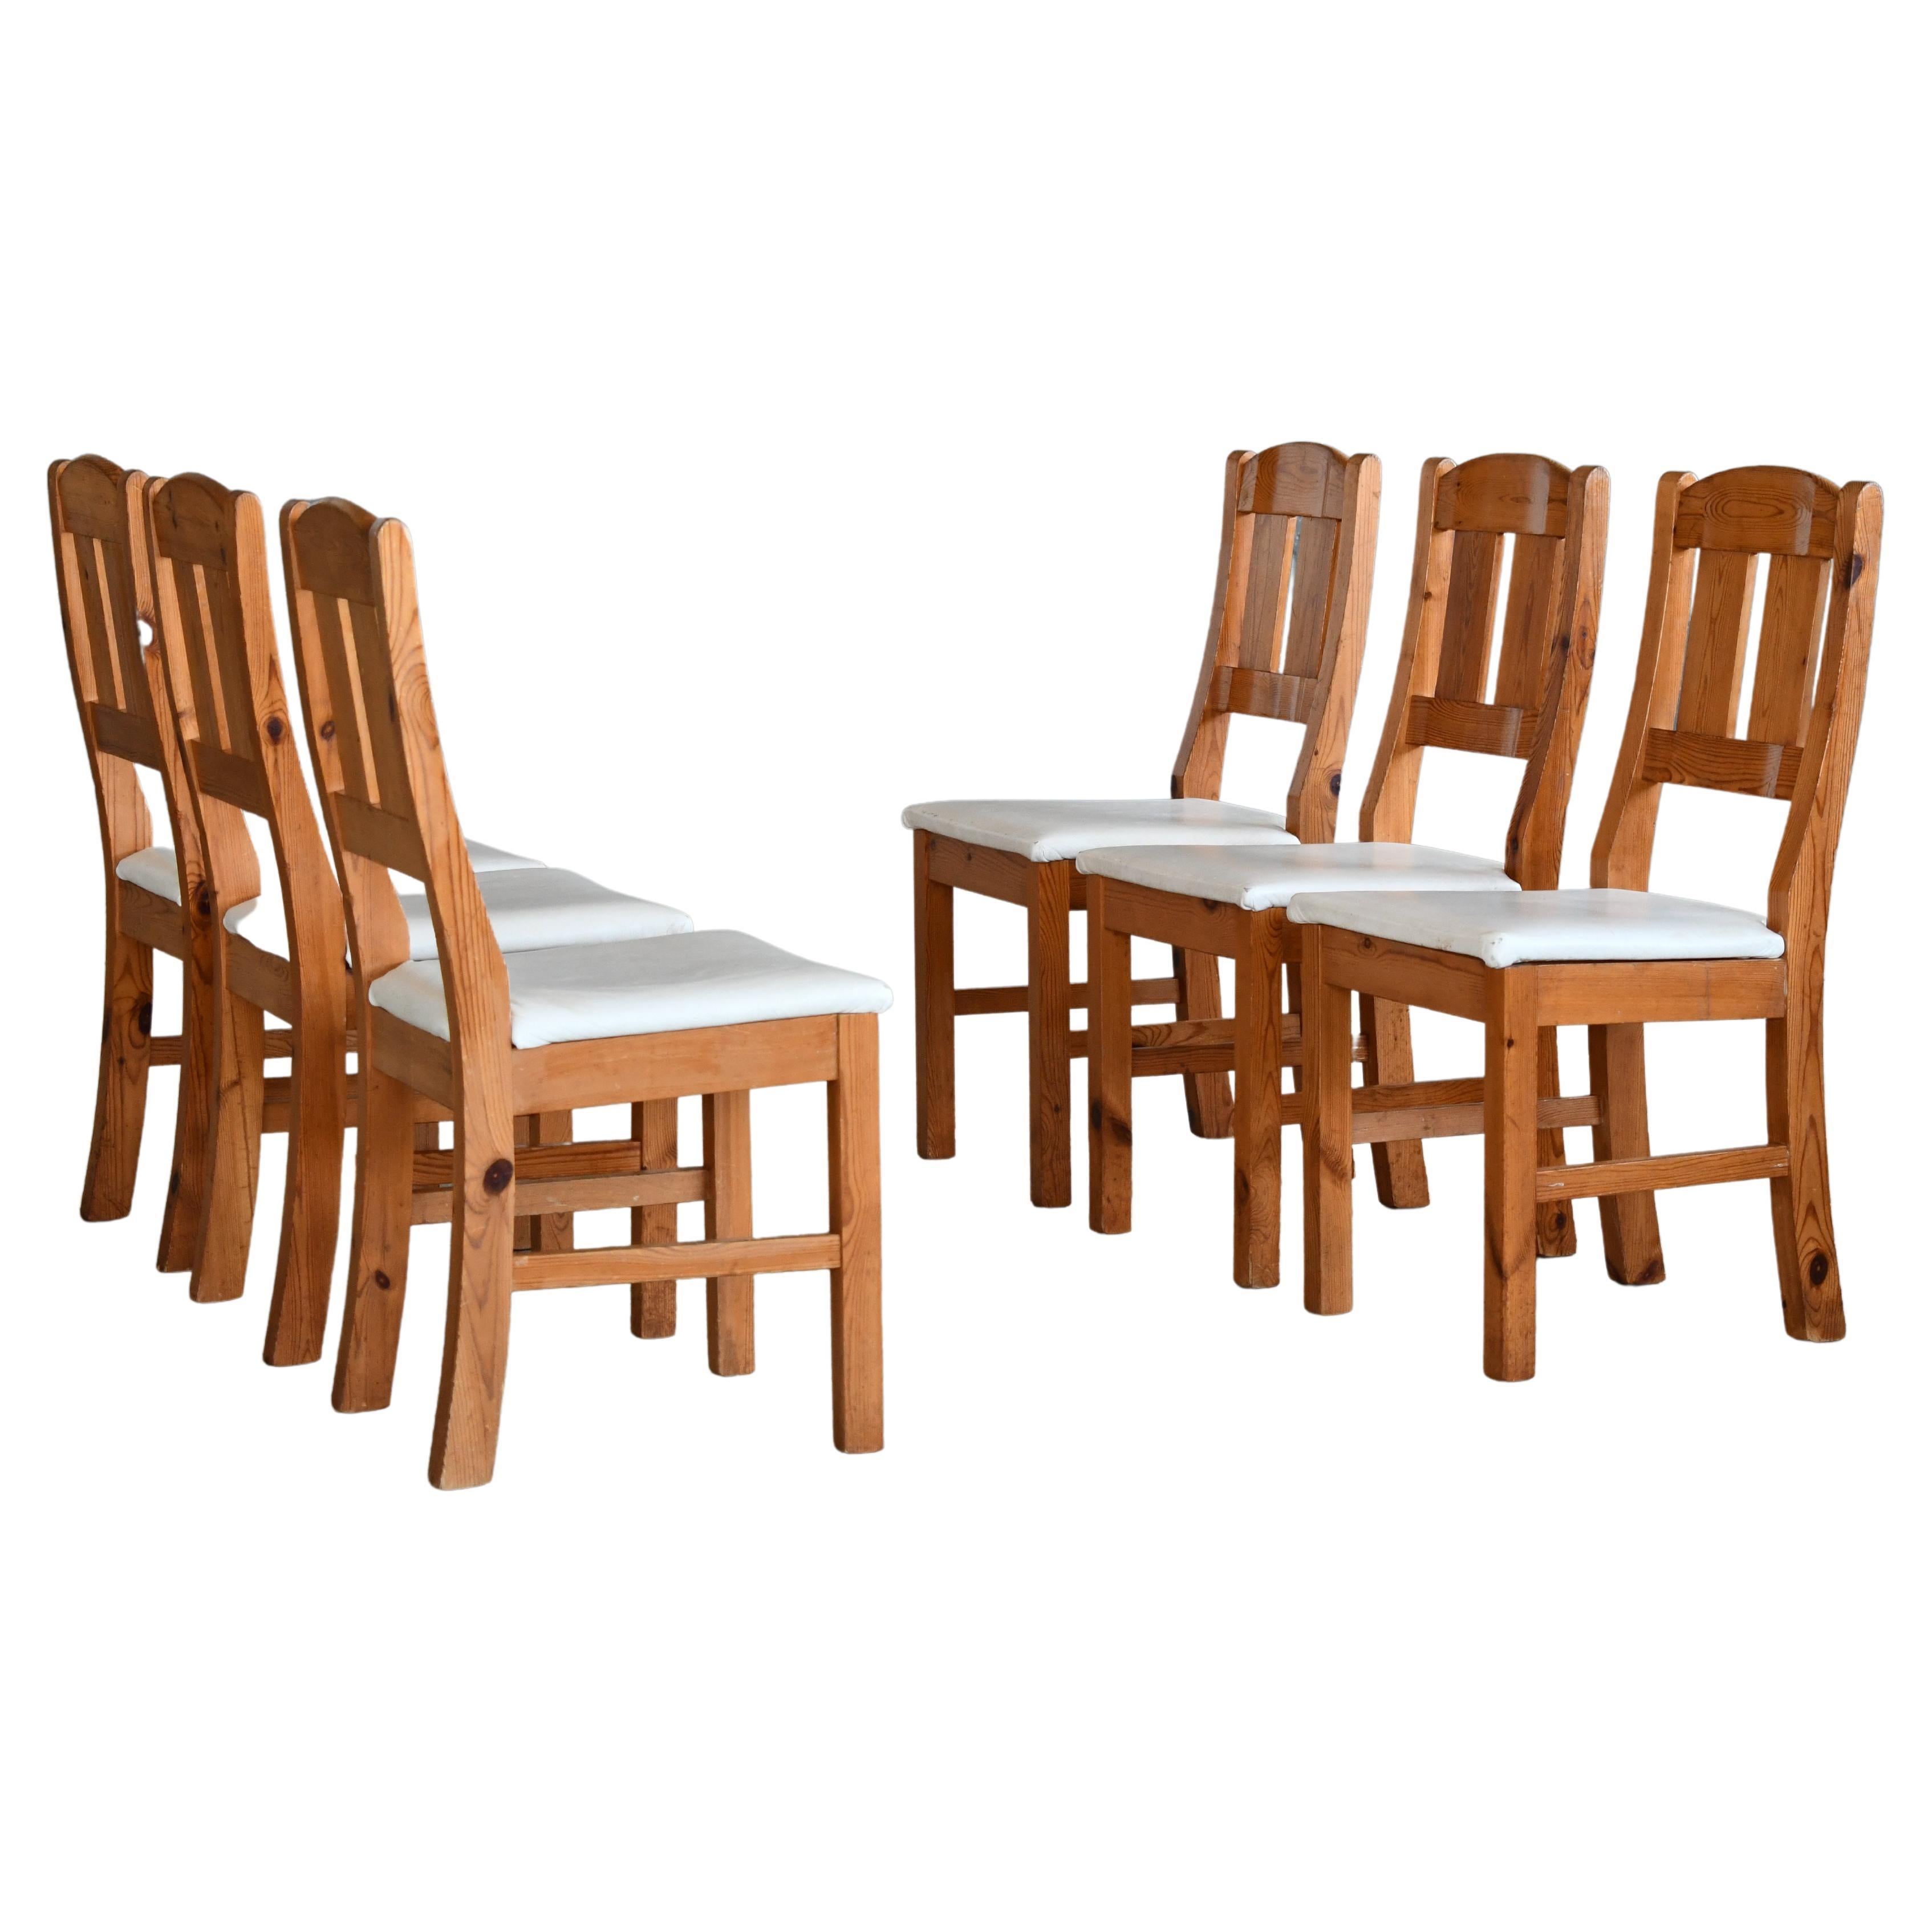 Set of Six Danish Oak Dining chairs with Leather Cushions, 1930's For Sale